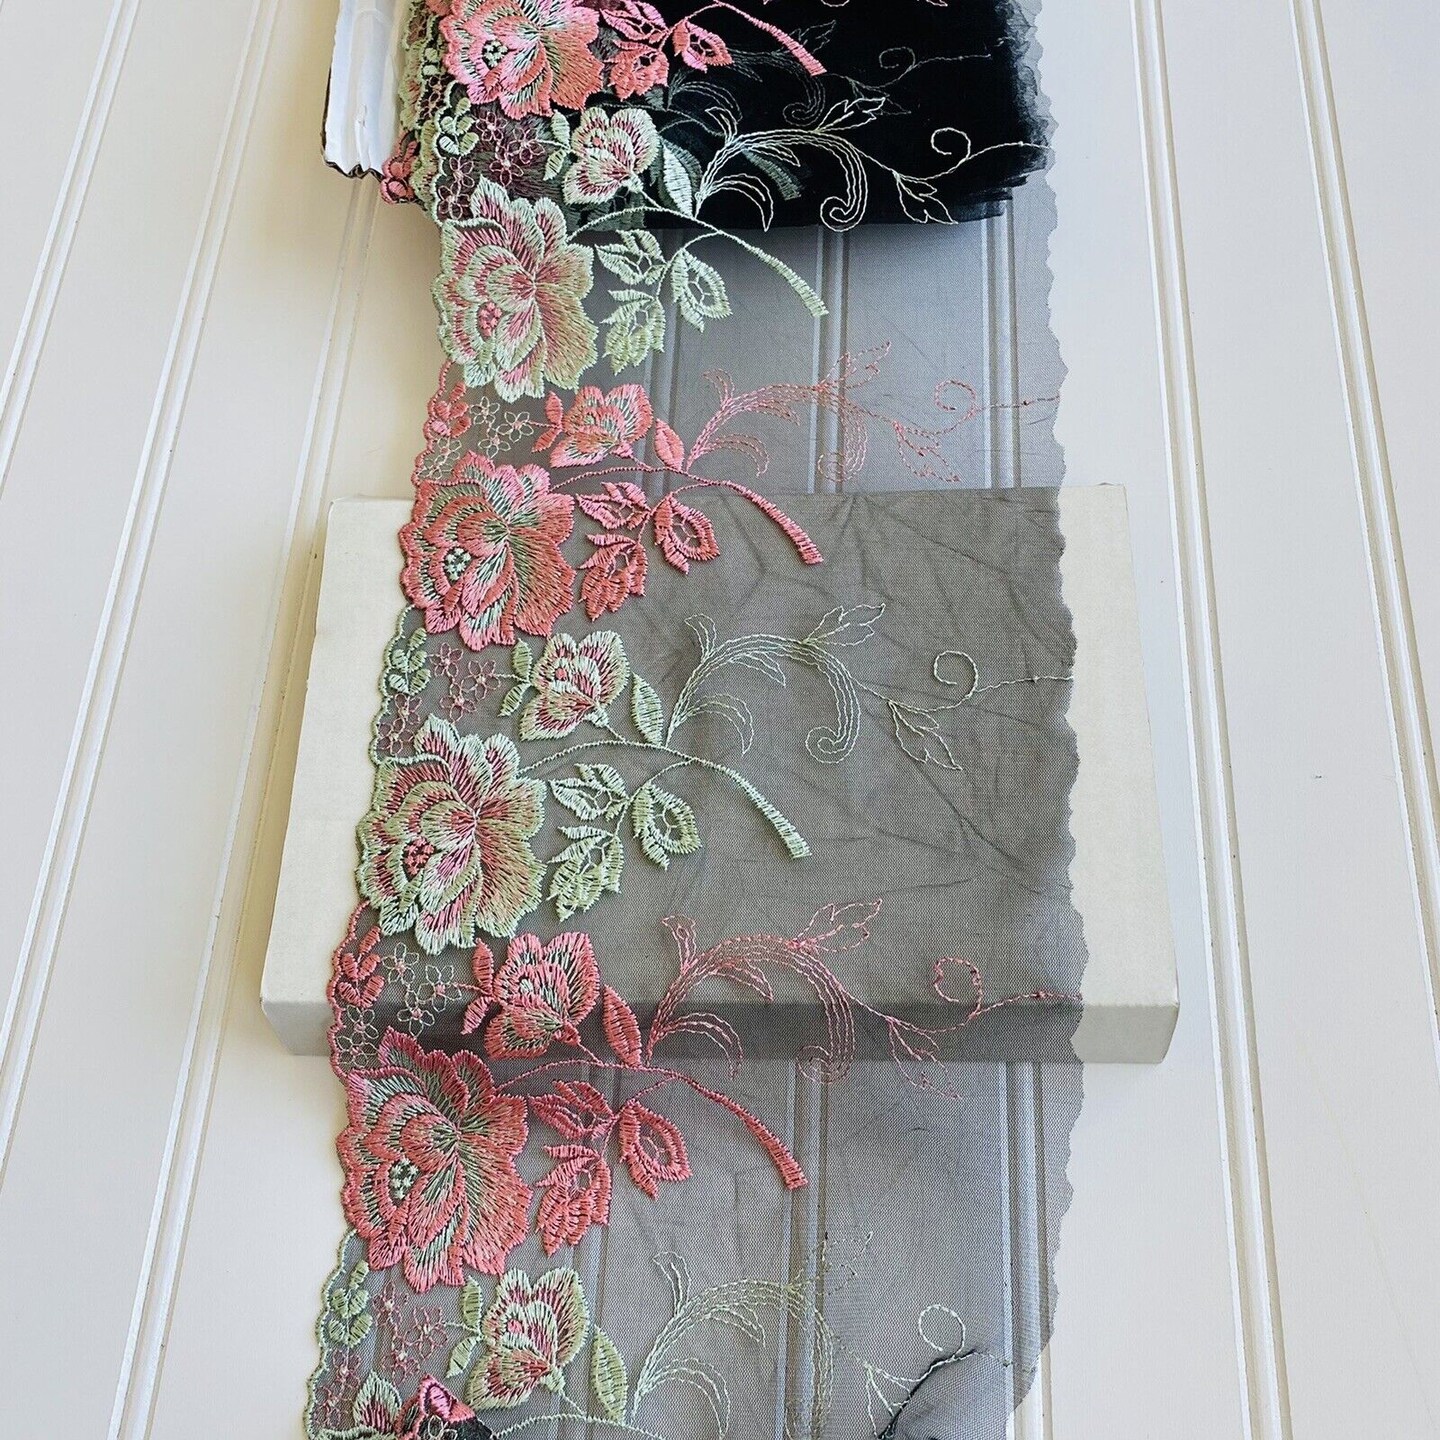 Kitcheniva Floral Embroidered Lace Trim Black Tulle Crafts